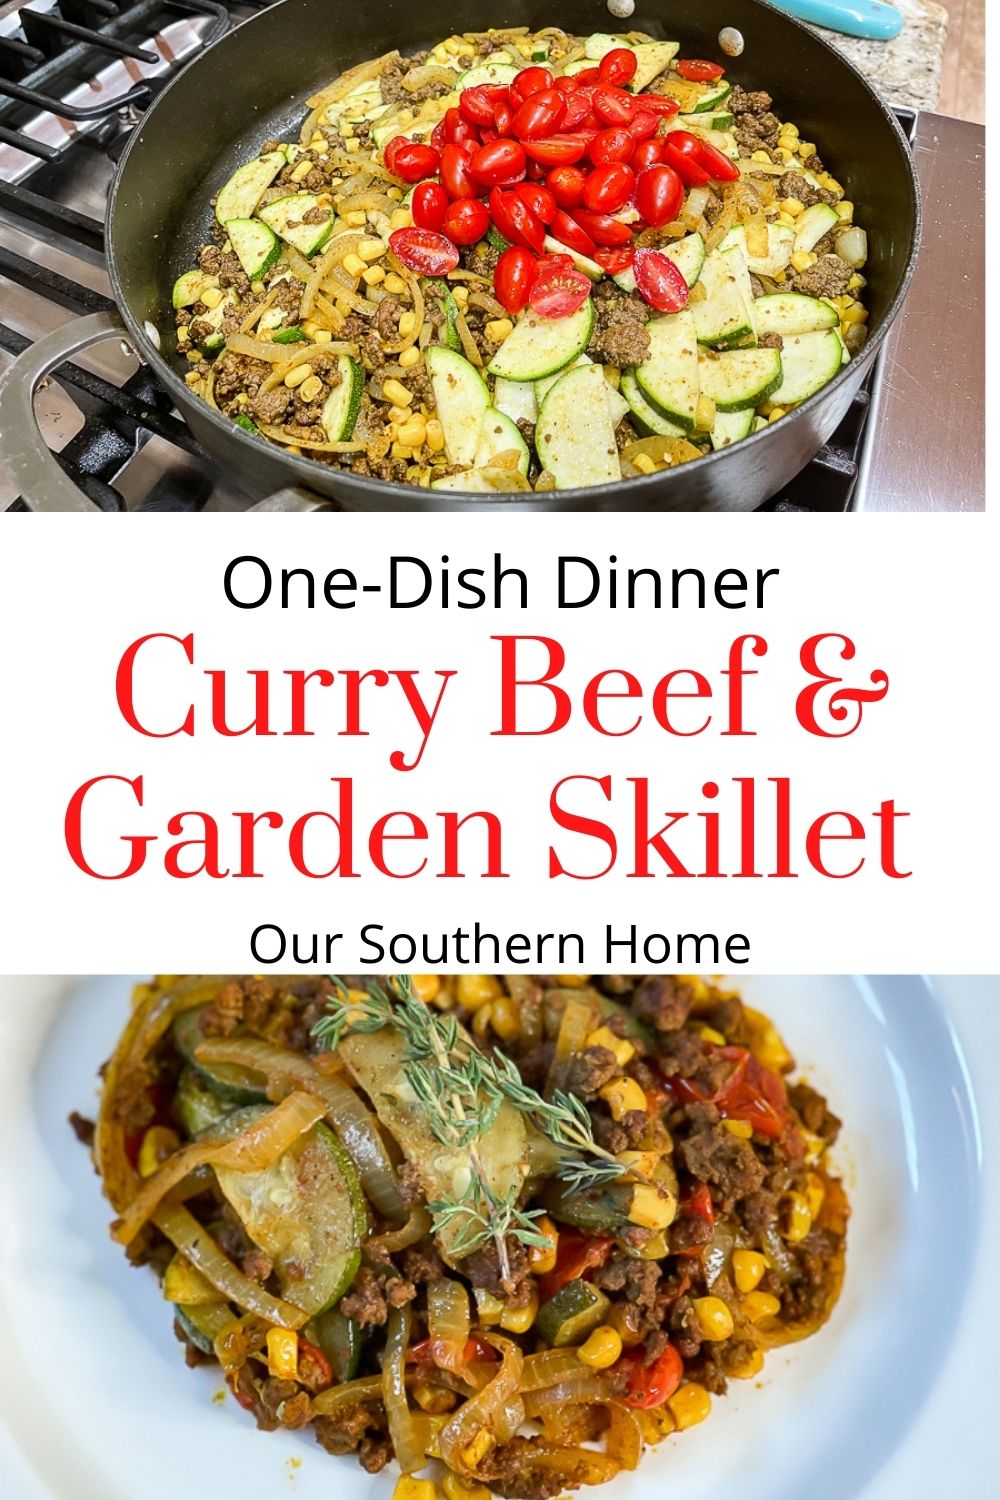 https://www.oursouthernhomesc.com/wp-content/uploads/curry-beef-garden-skillet-pin-2.jpg